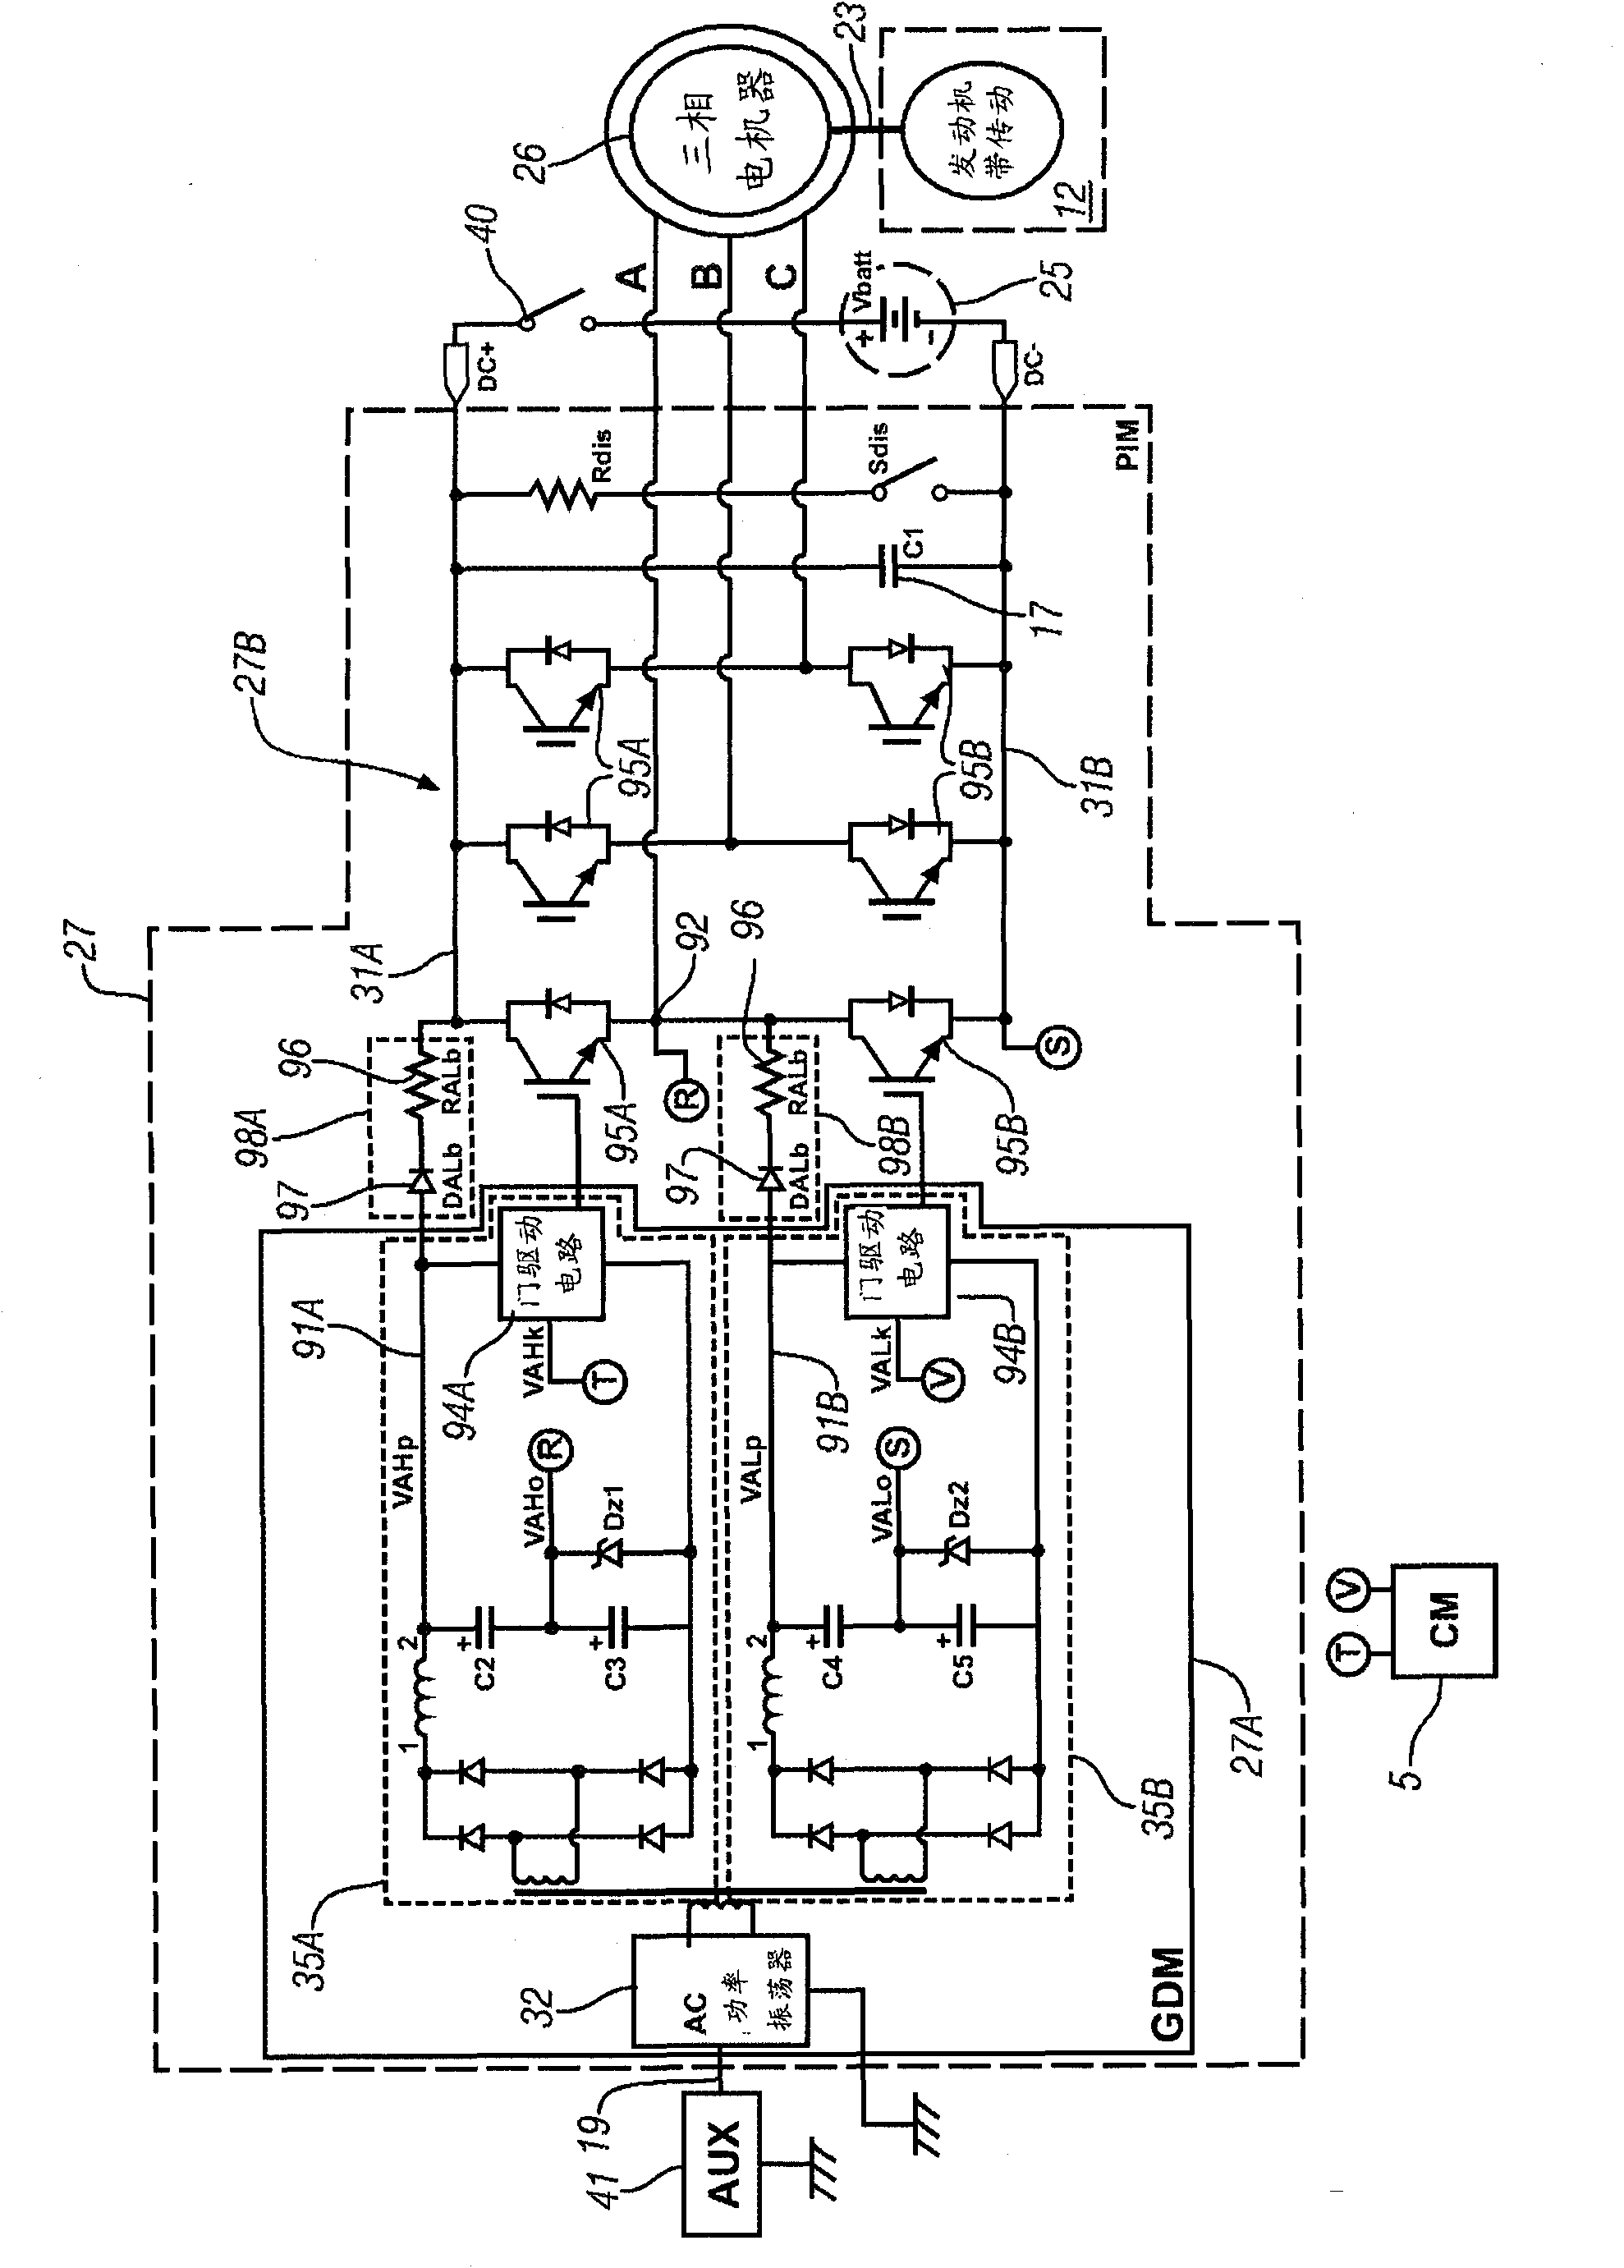 Control of an alternator-starter for a hybrid electric vehicle having a disconnected high-voltage battery